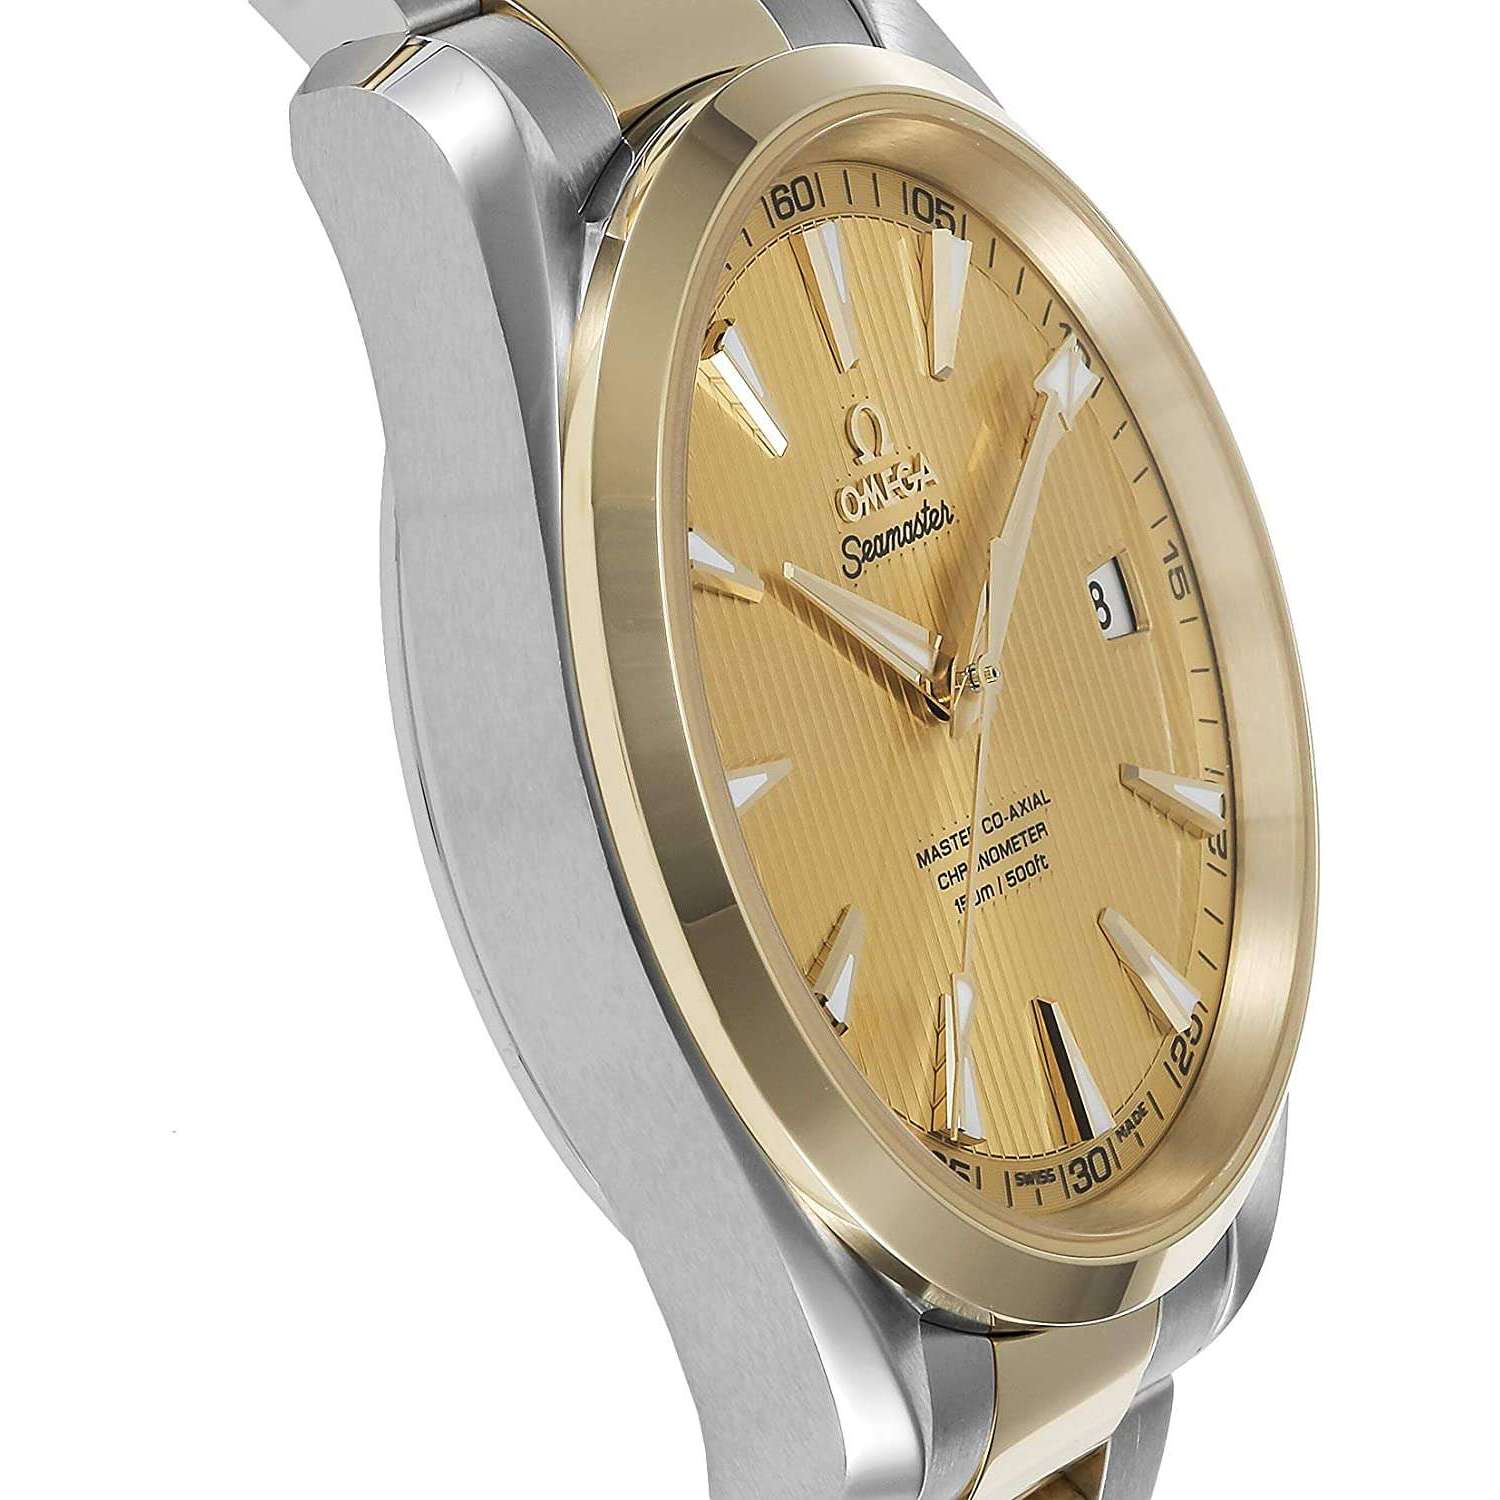 ROOK JAPAN:OMEGA SEAMASTER MASTER CO-AXIAL CHRONOMETER 42 MM MEN WATCH 231.20.42.21.08.001,Luxury Watch,Omega